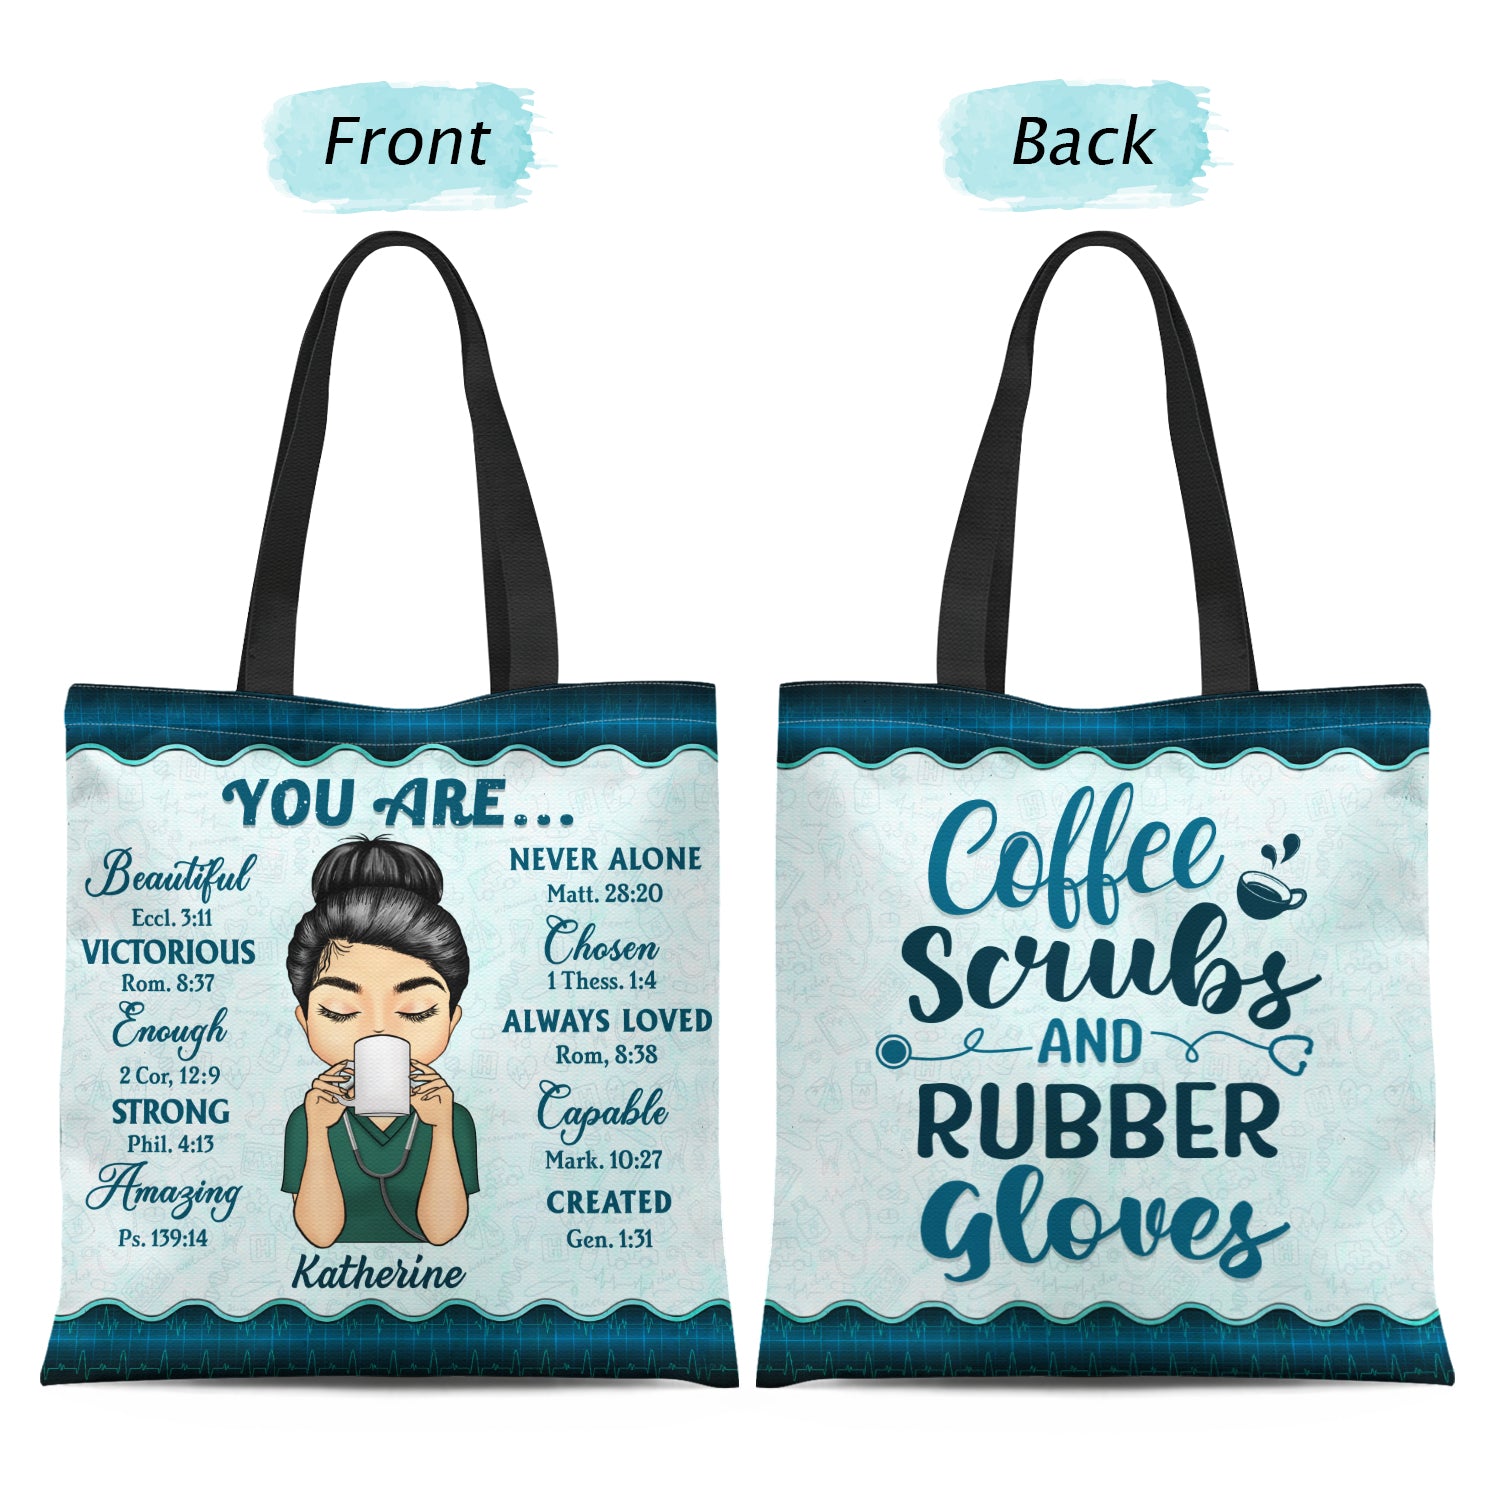 Coffee, Scrubs And Rubber Gloves - Gift For Nurse - Personalized Custom Zippered Canvas Bag